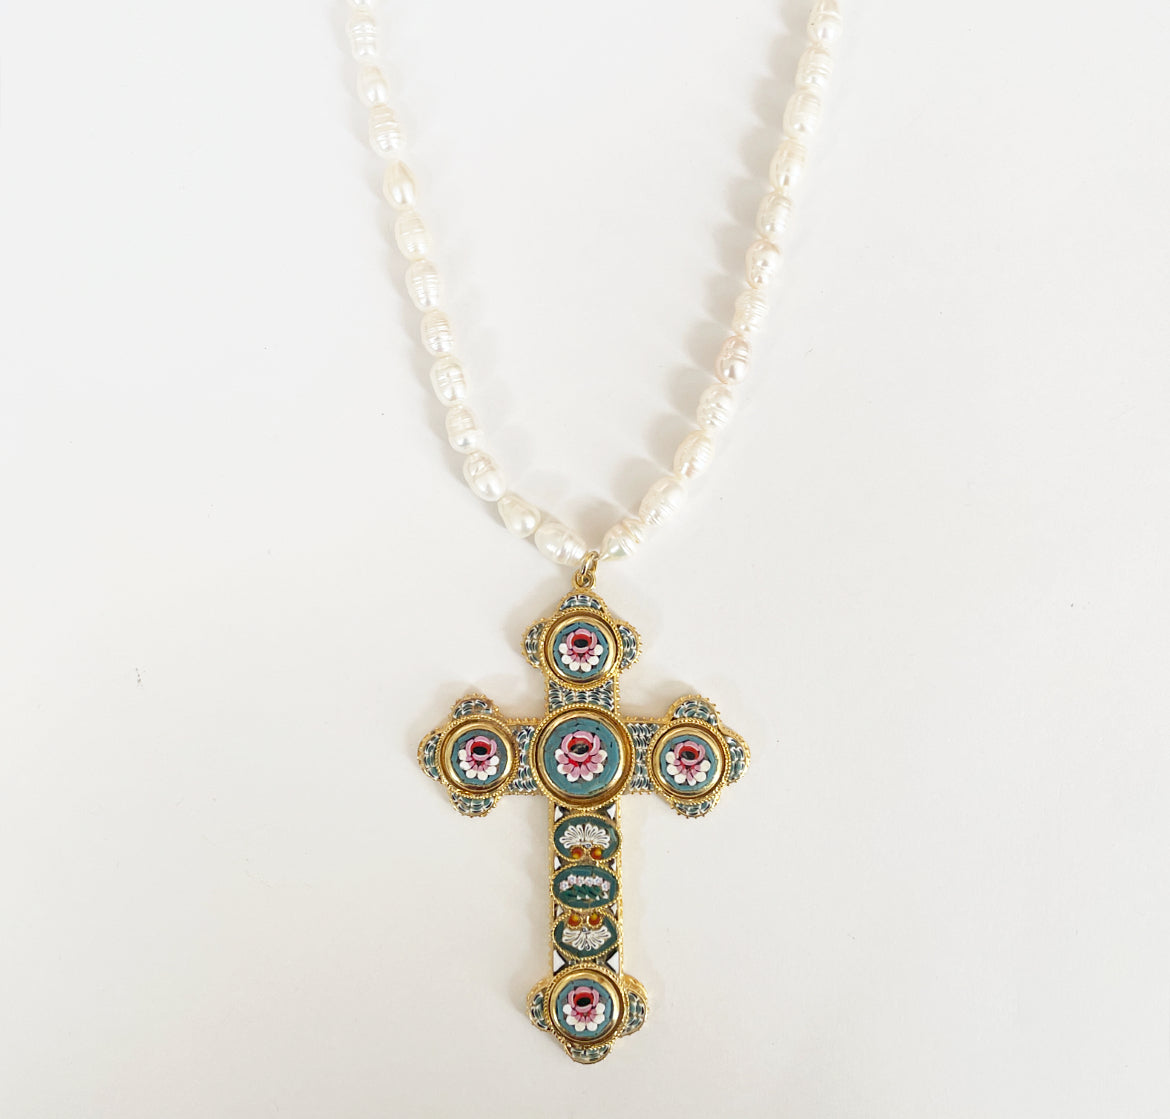 Dreamy pieces micro mosaic cross necklace